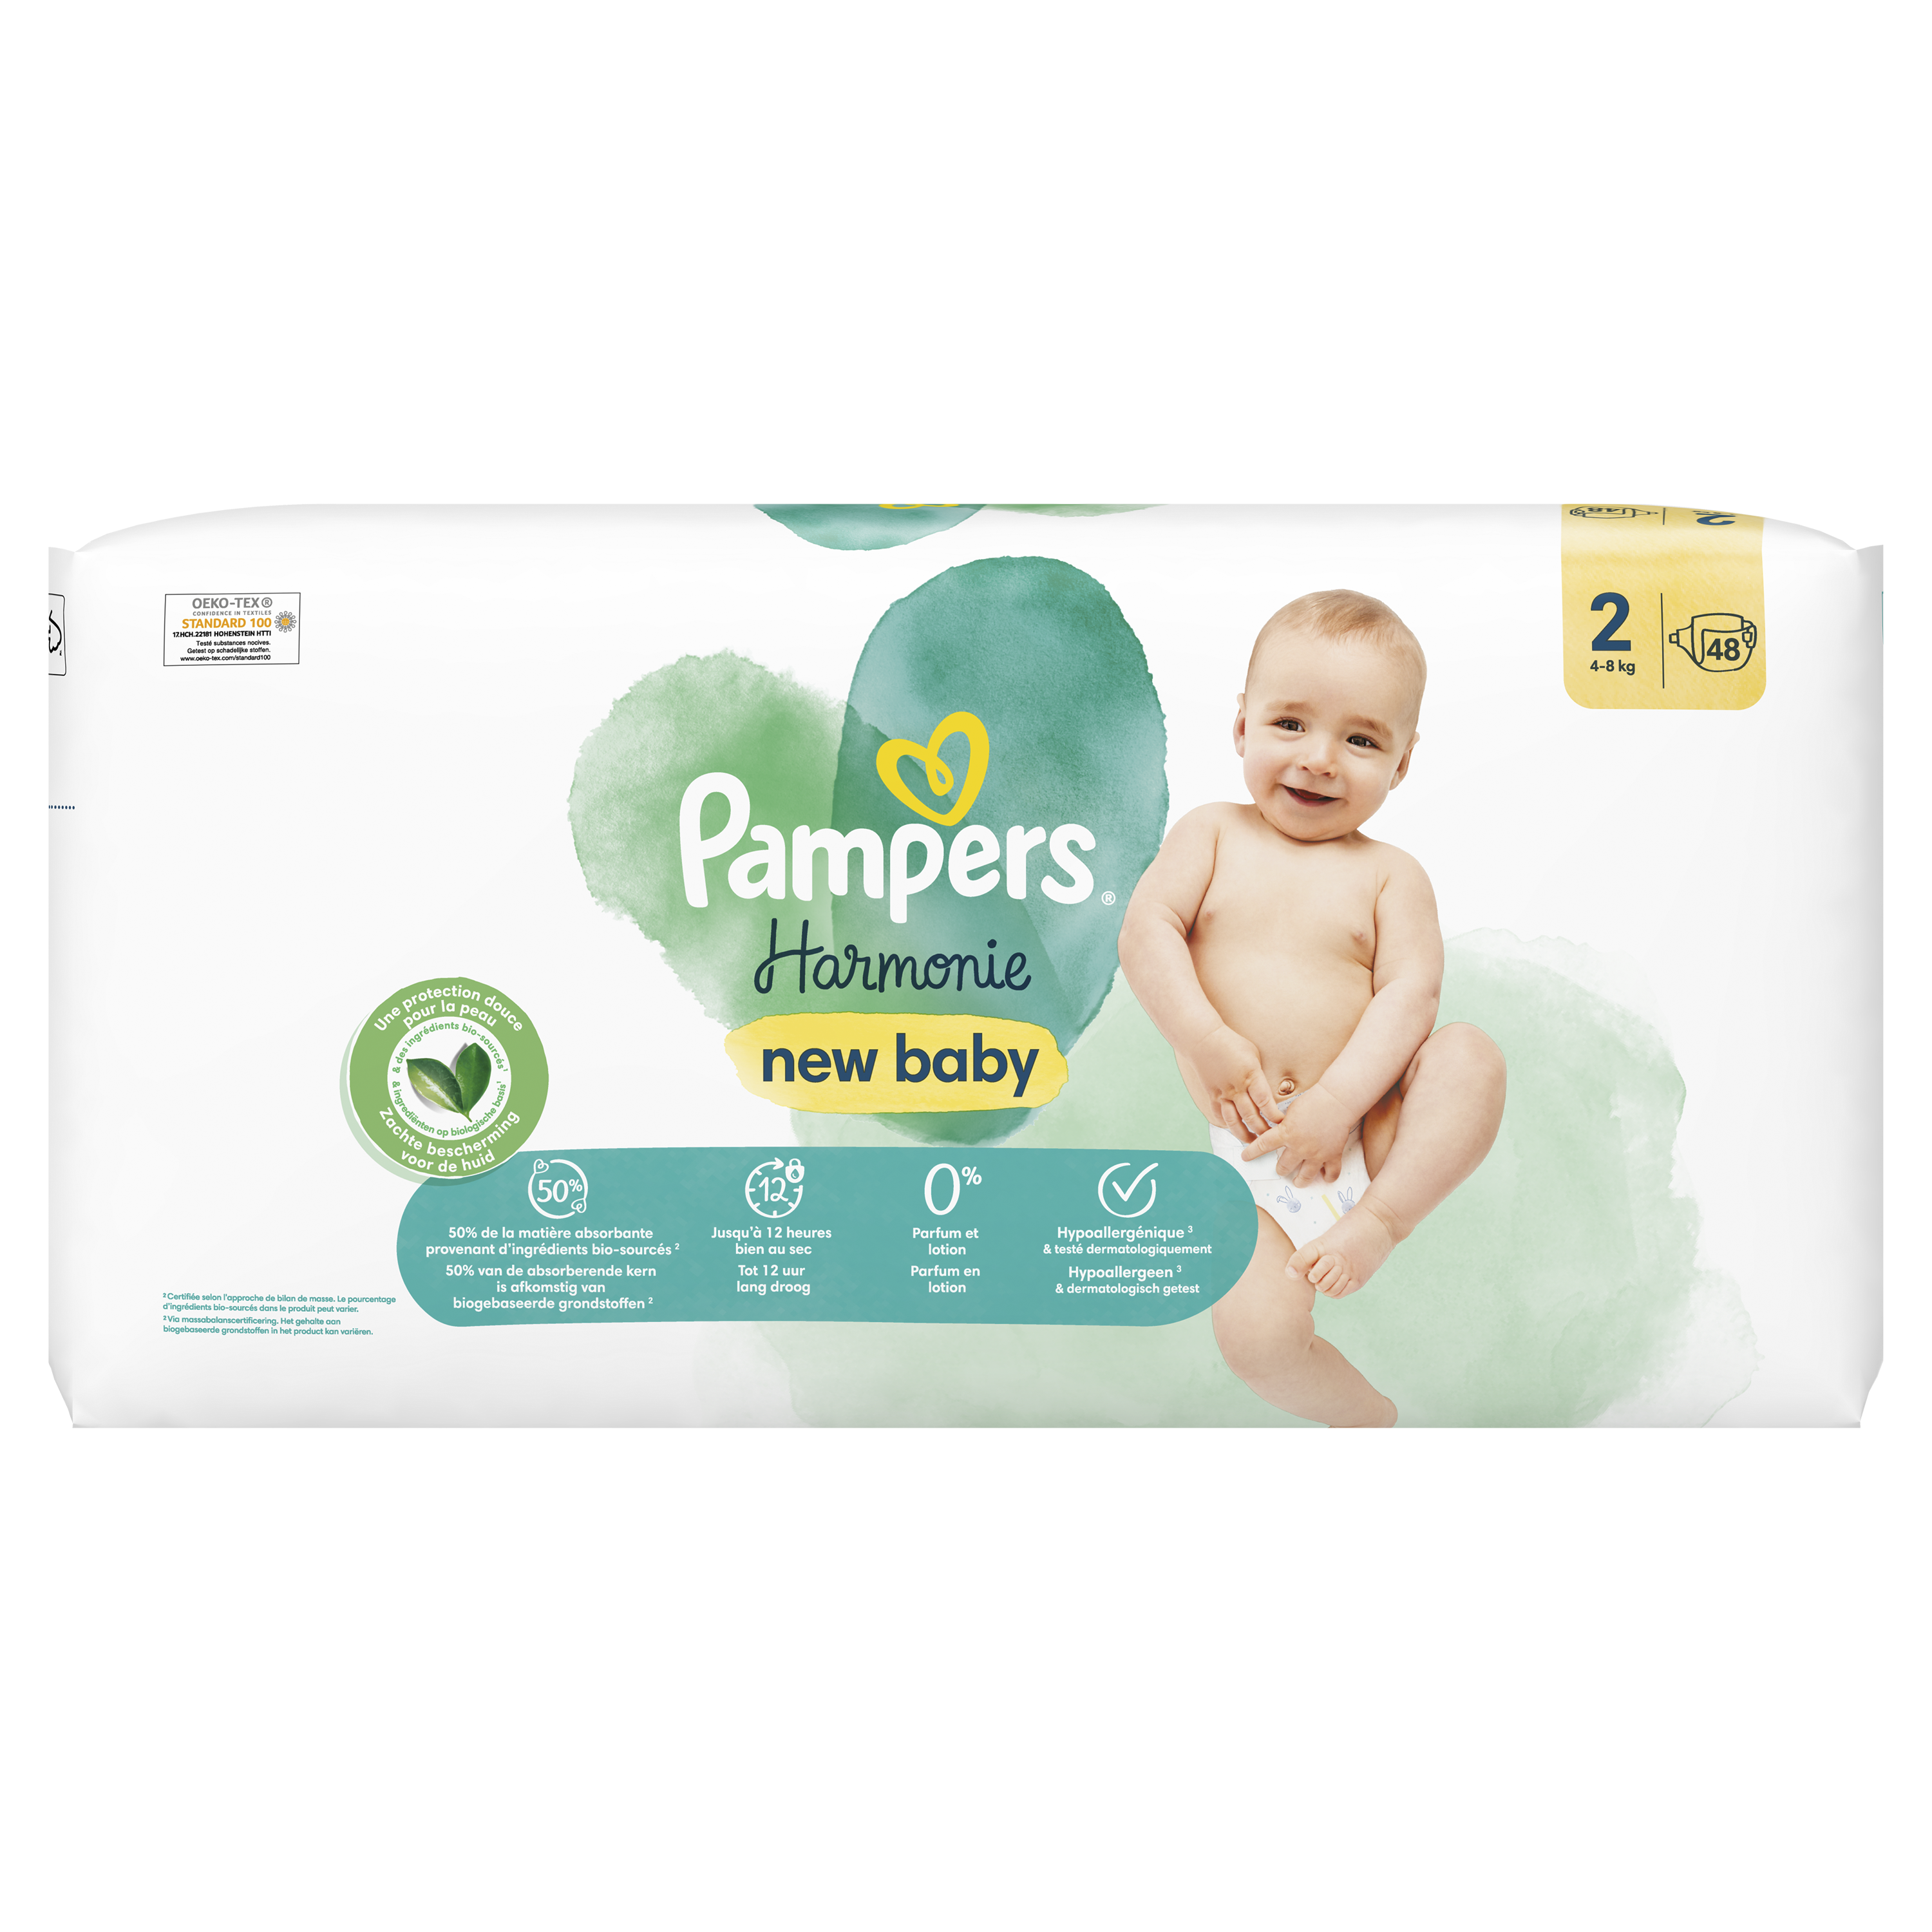 Pampers Couches Harmonie taille 2, 4-8 kg, pack mensuel 1x240 pièces